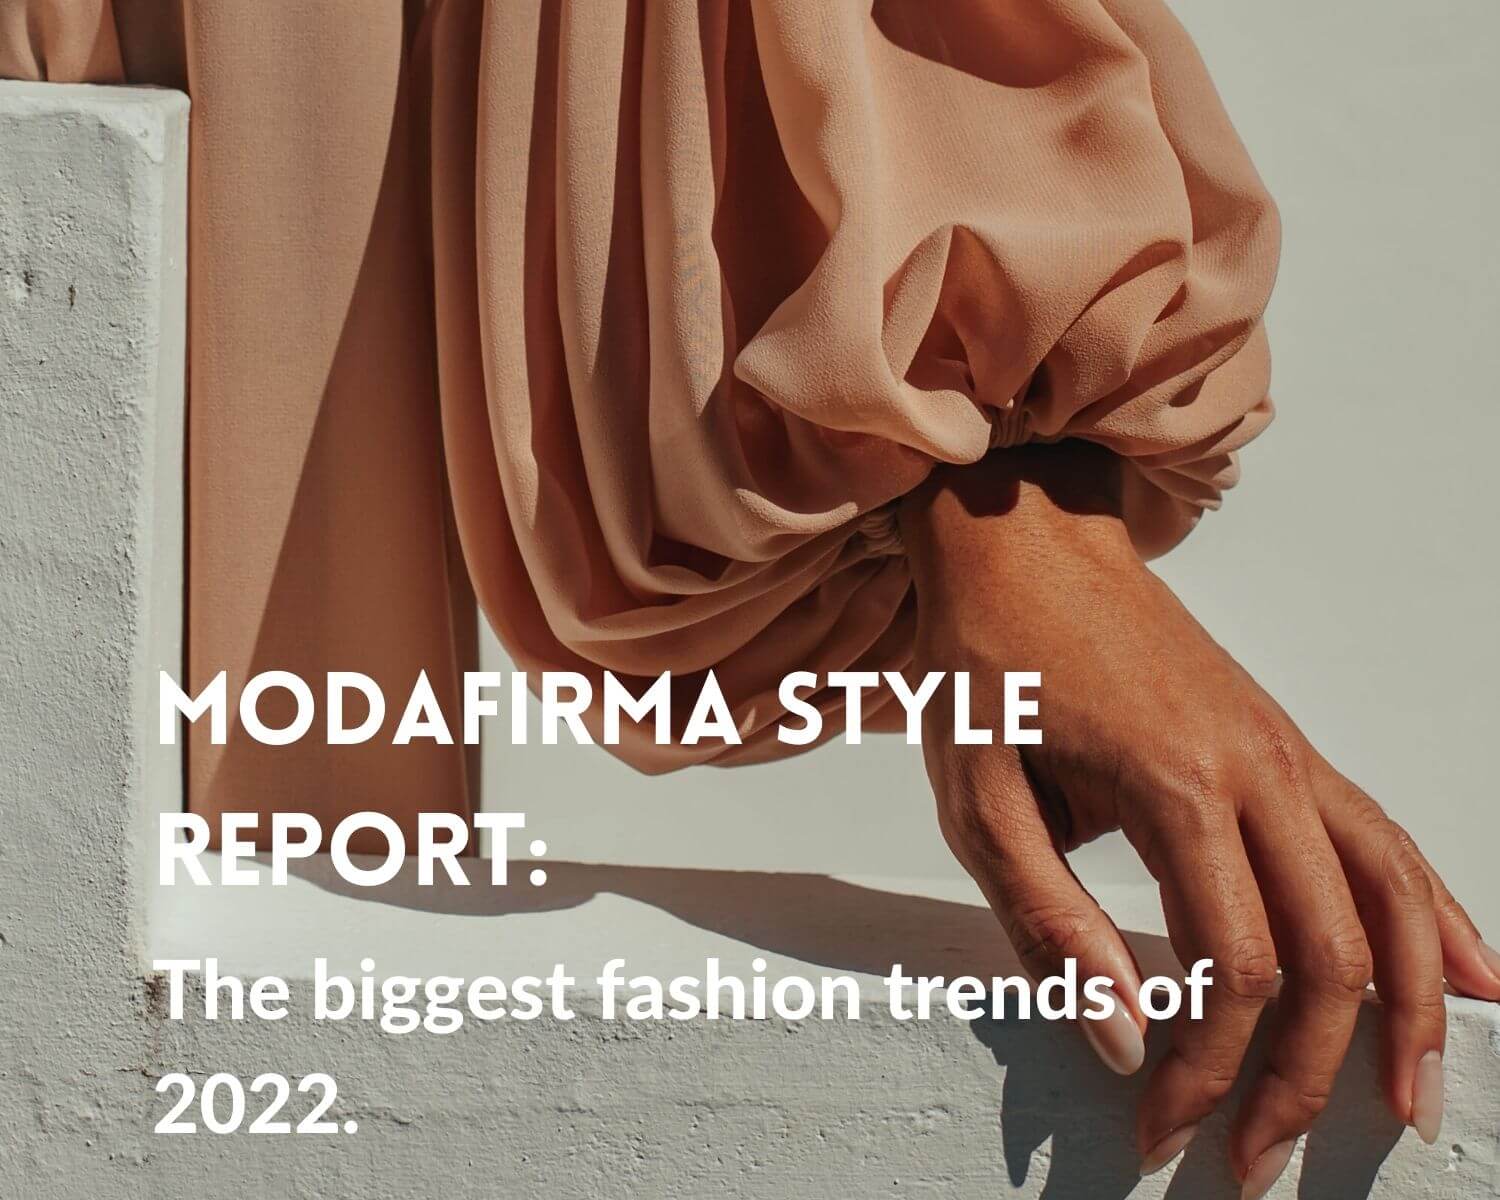 fashion trends 2022 Modafirma Style Report: The biggest fashion trends of 2022.